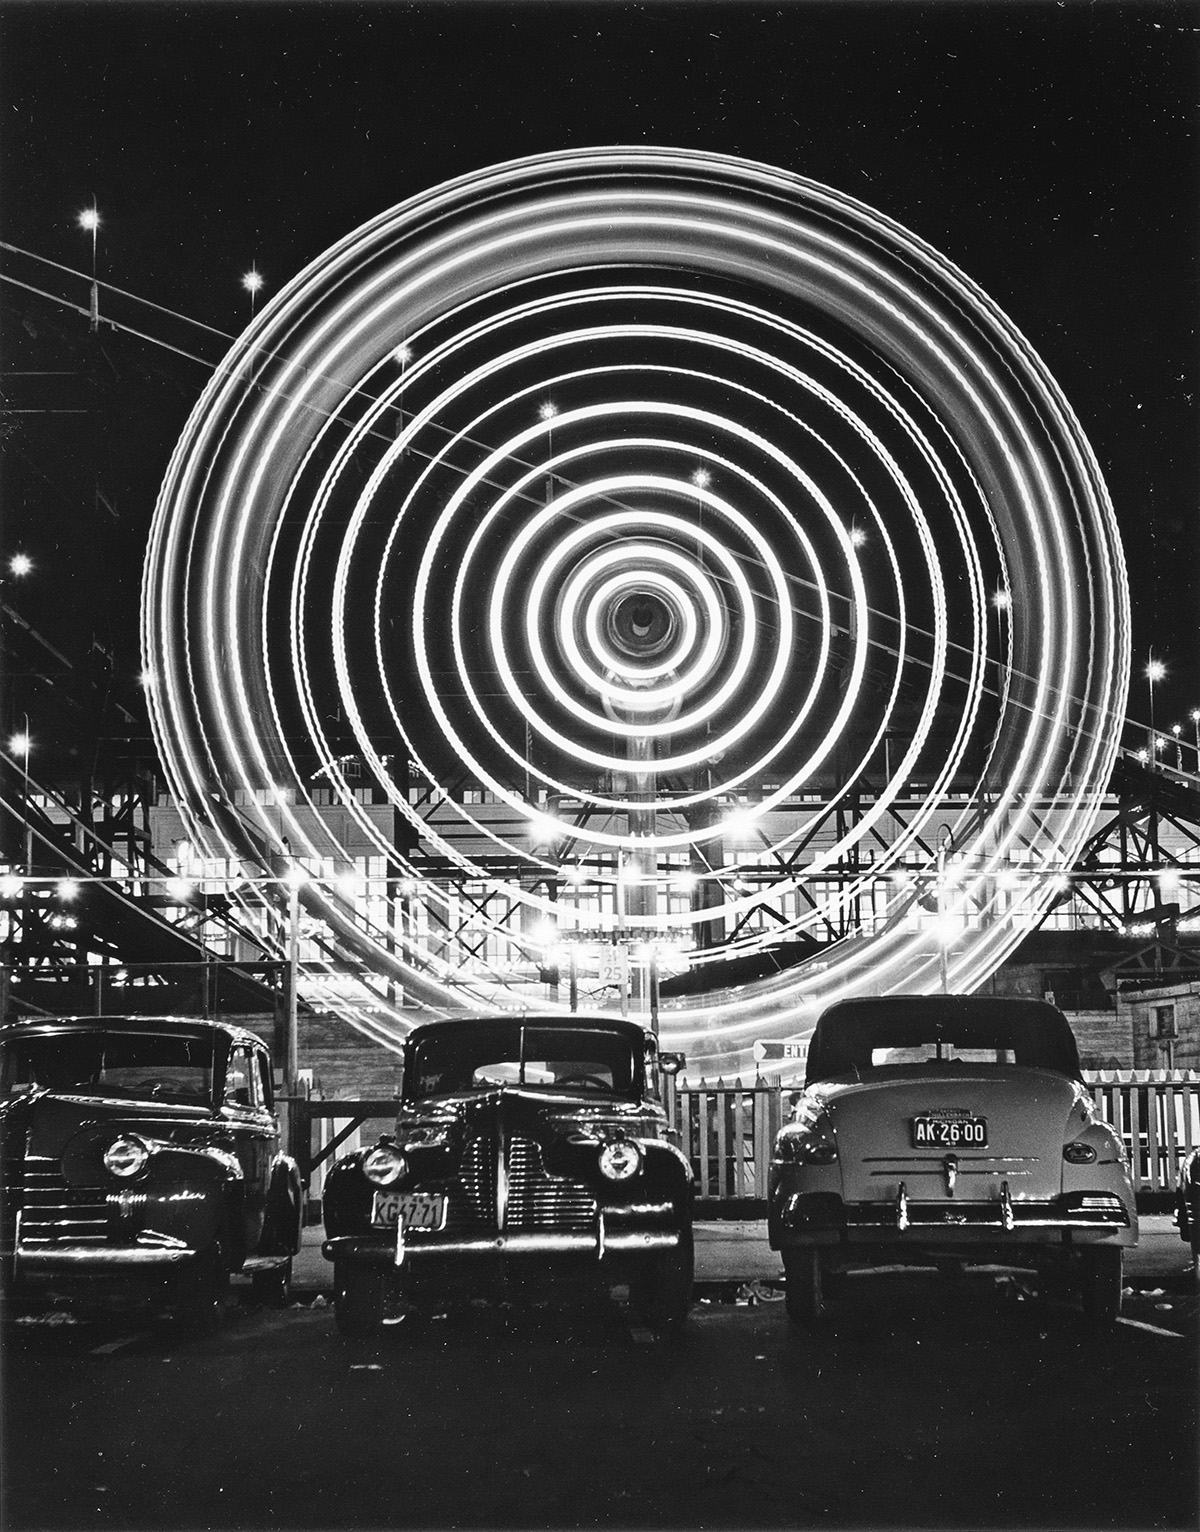 Night scene with cars and abstraction of ferris wheel